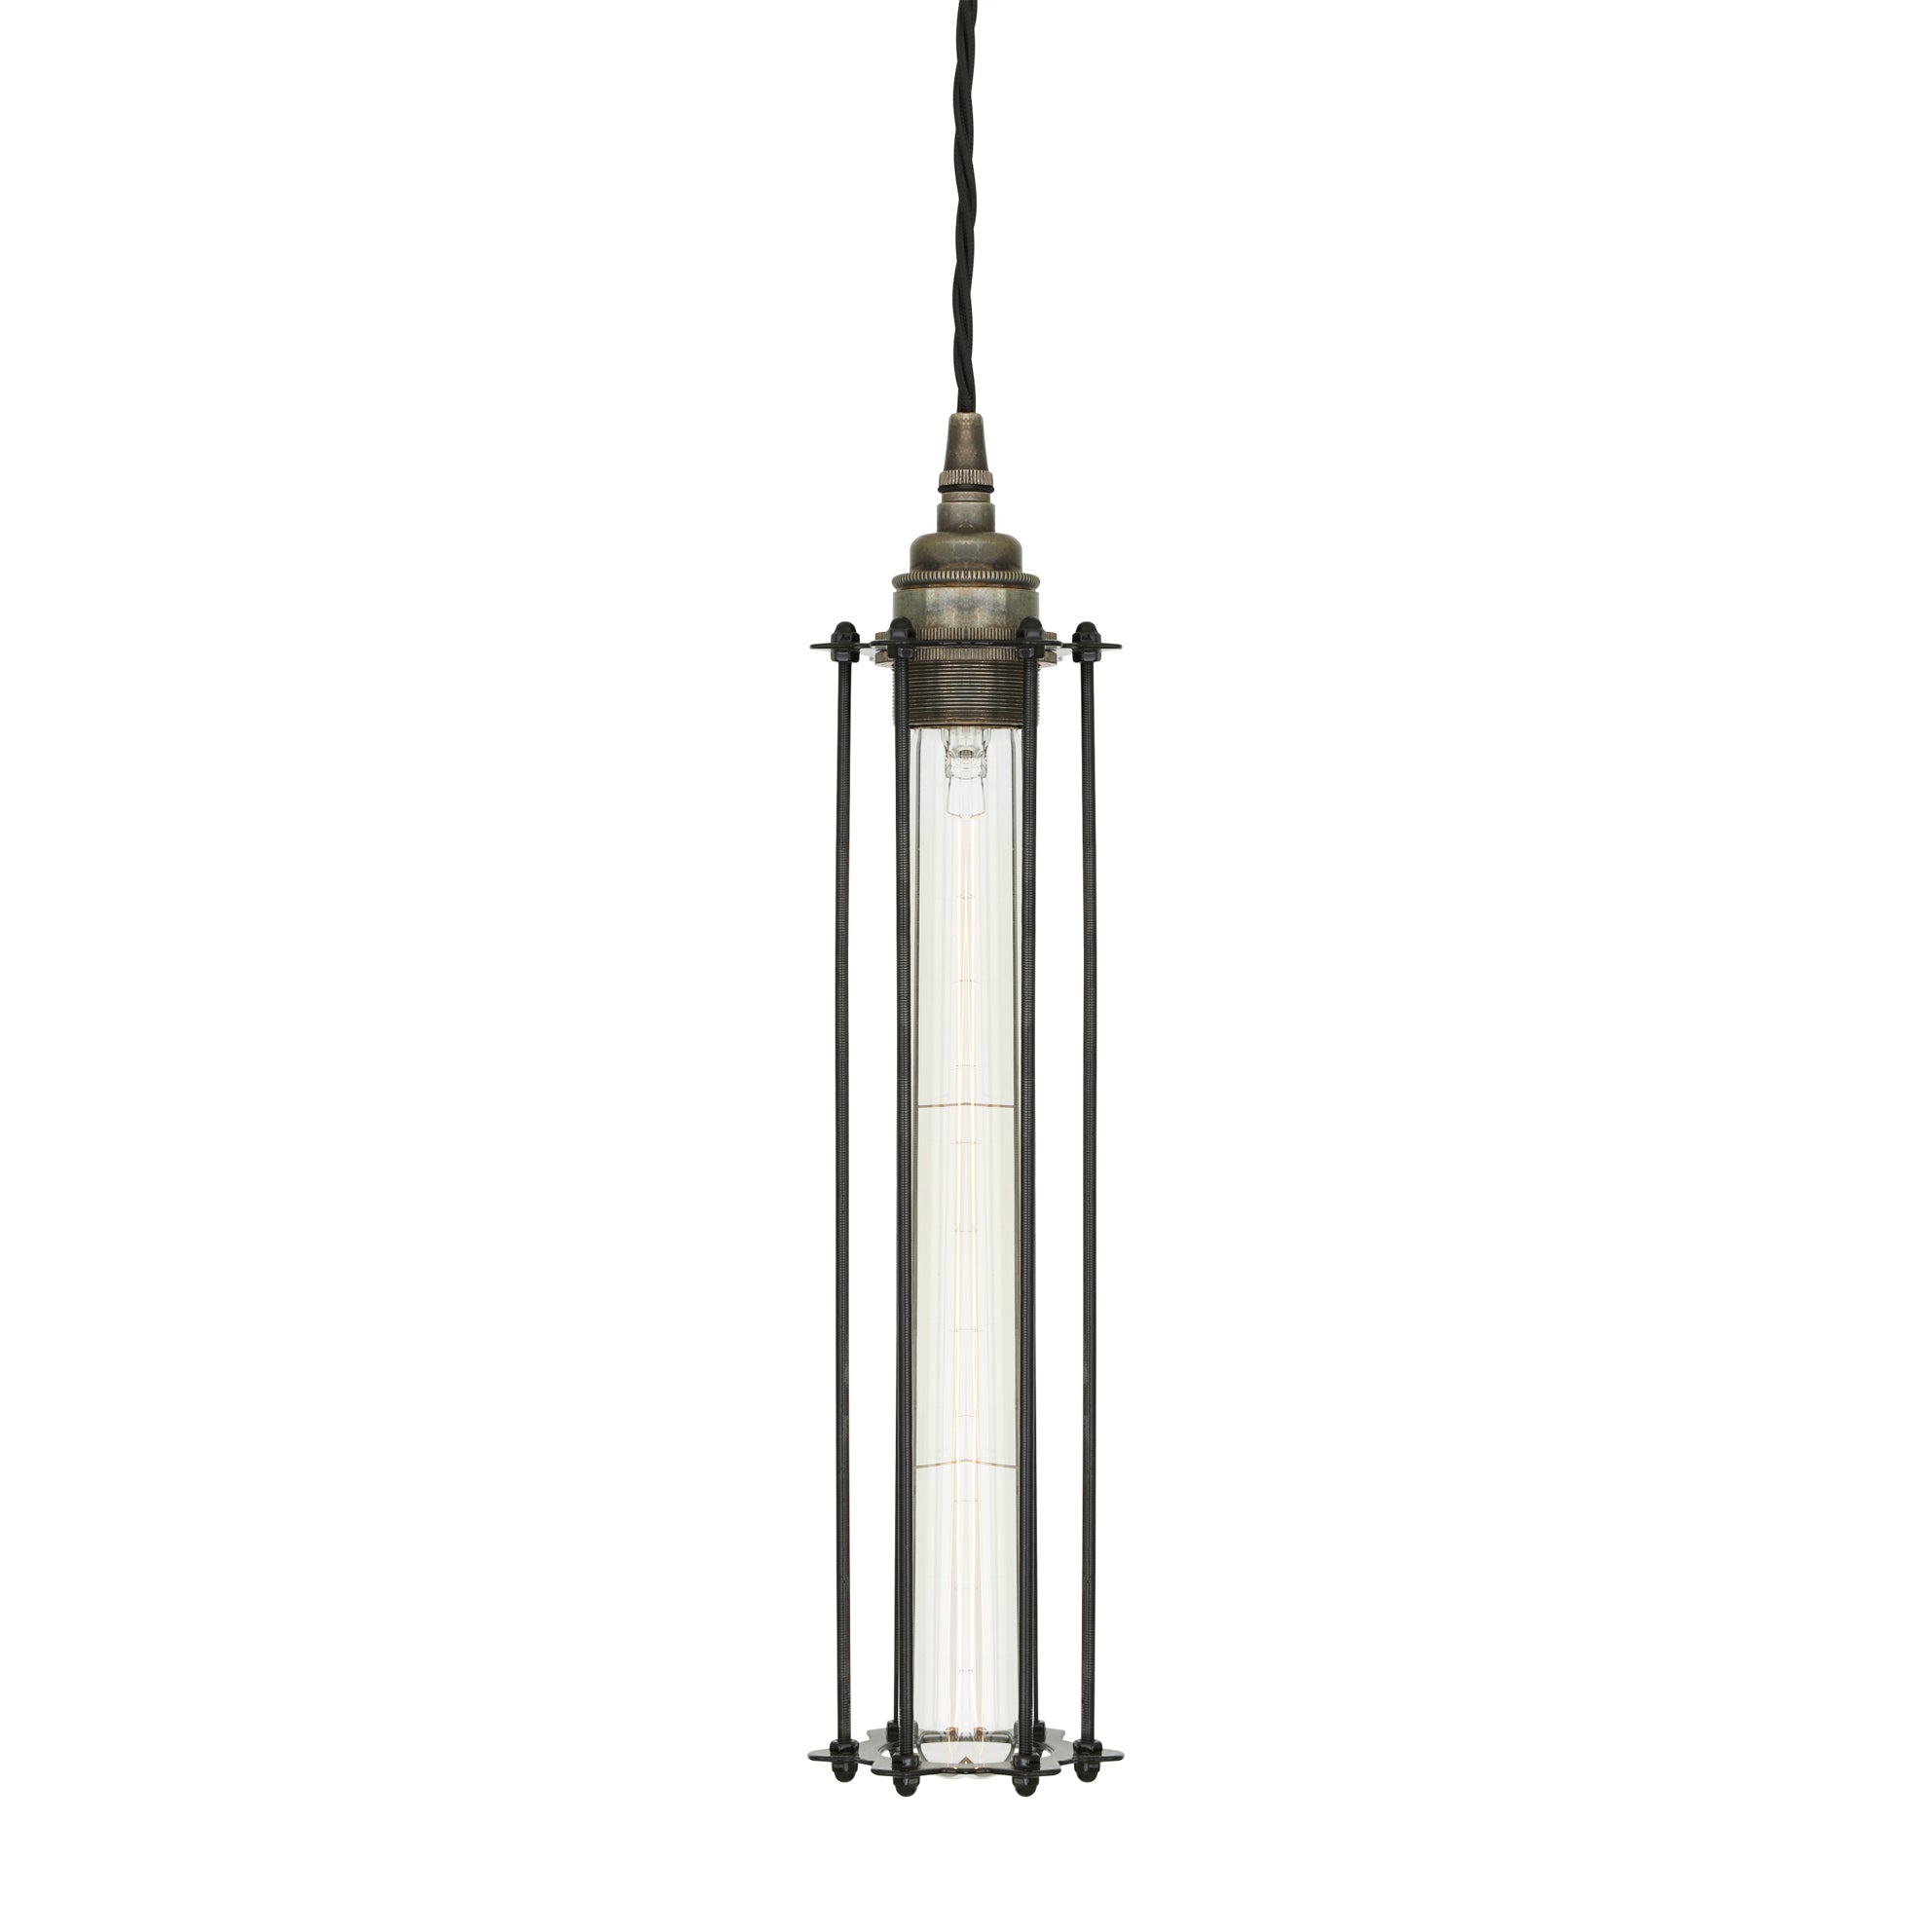 Beirut Pendant in Antique Siver with Black Cage